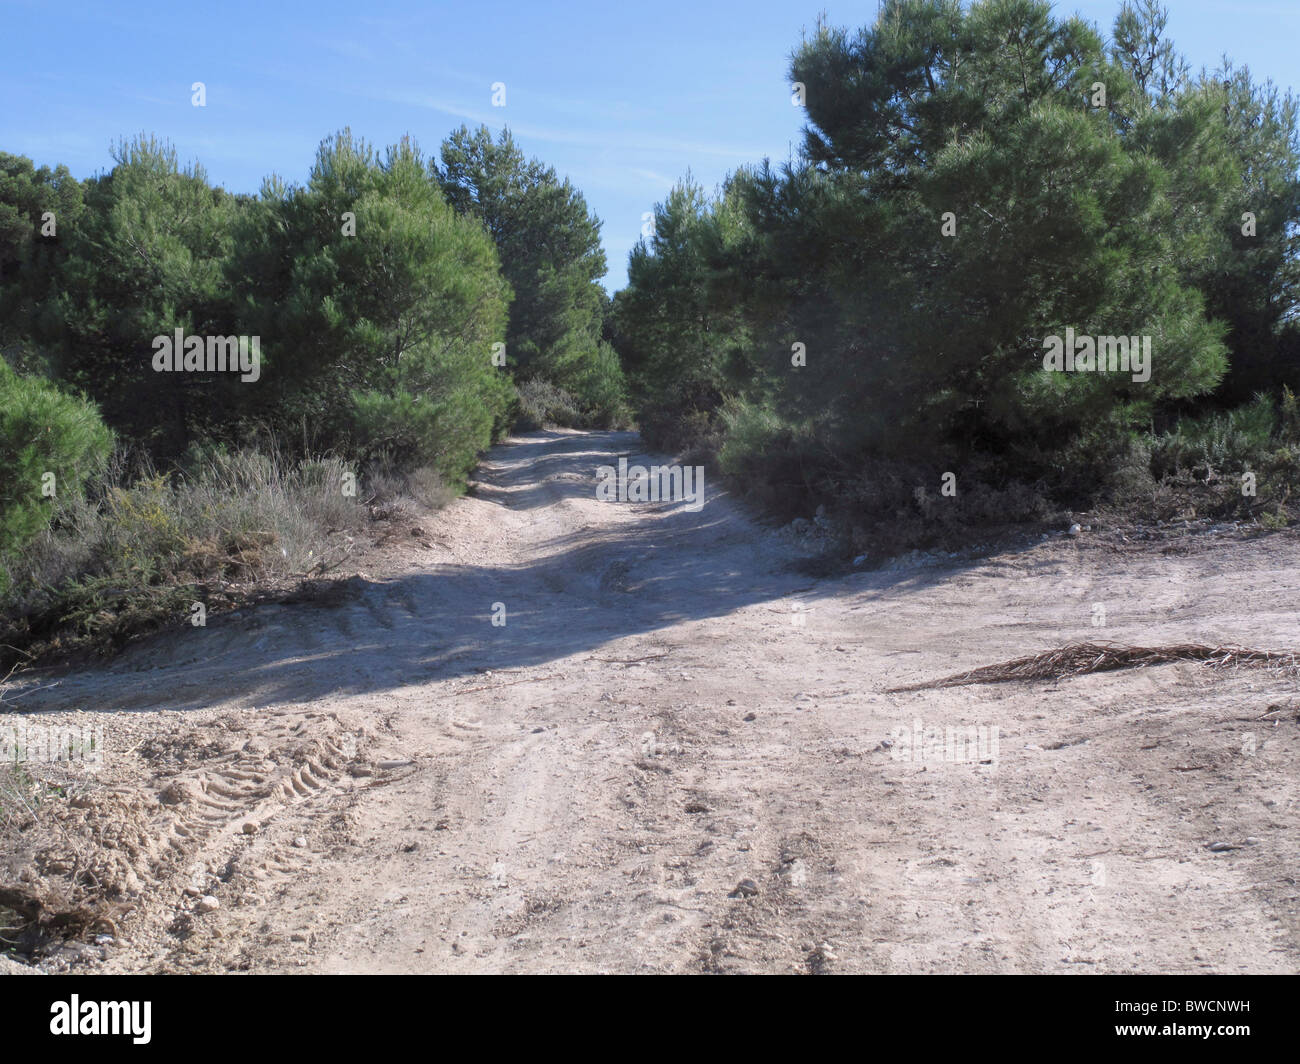 Cross roads on a rough country dirt track amongst young pine trees. Stock Photo